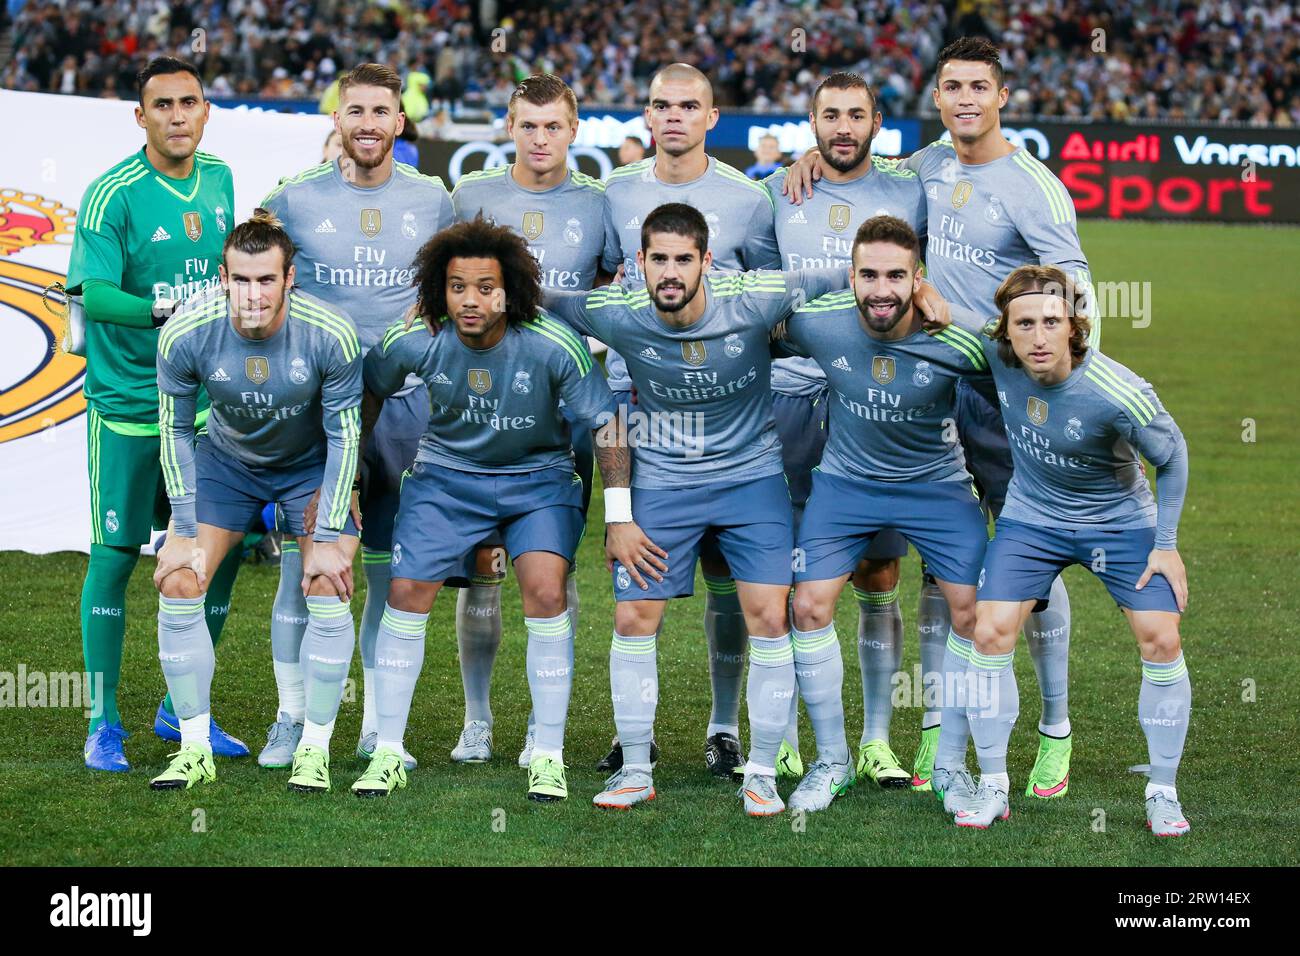 MELBOURNE, AUSTRALIA, JULY 24: Real Madrid team photo before Manchester City play Real Madrid in match 3 of the 2015 International Champions Cup Stock Photo